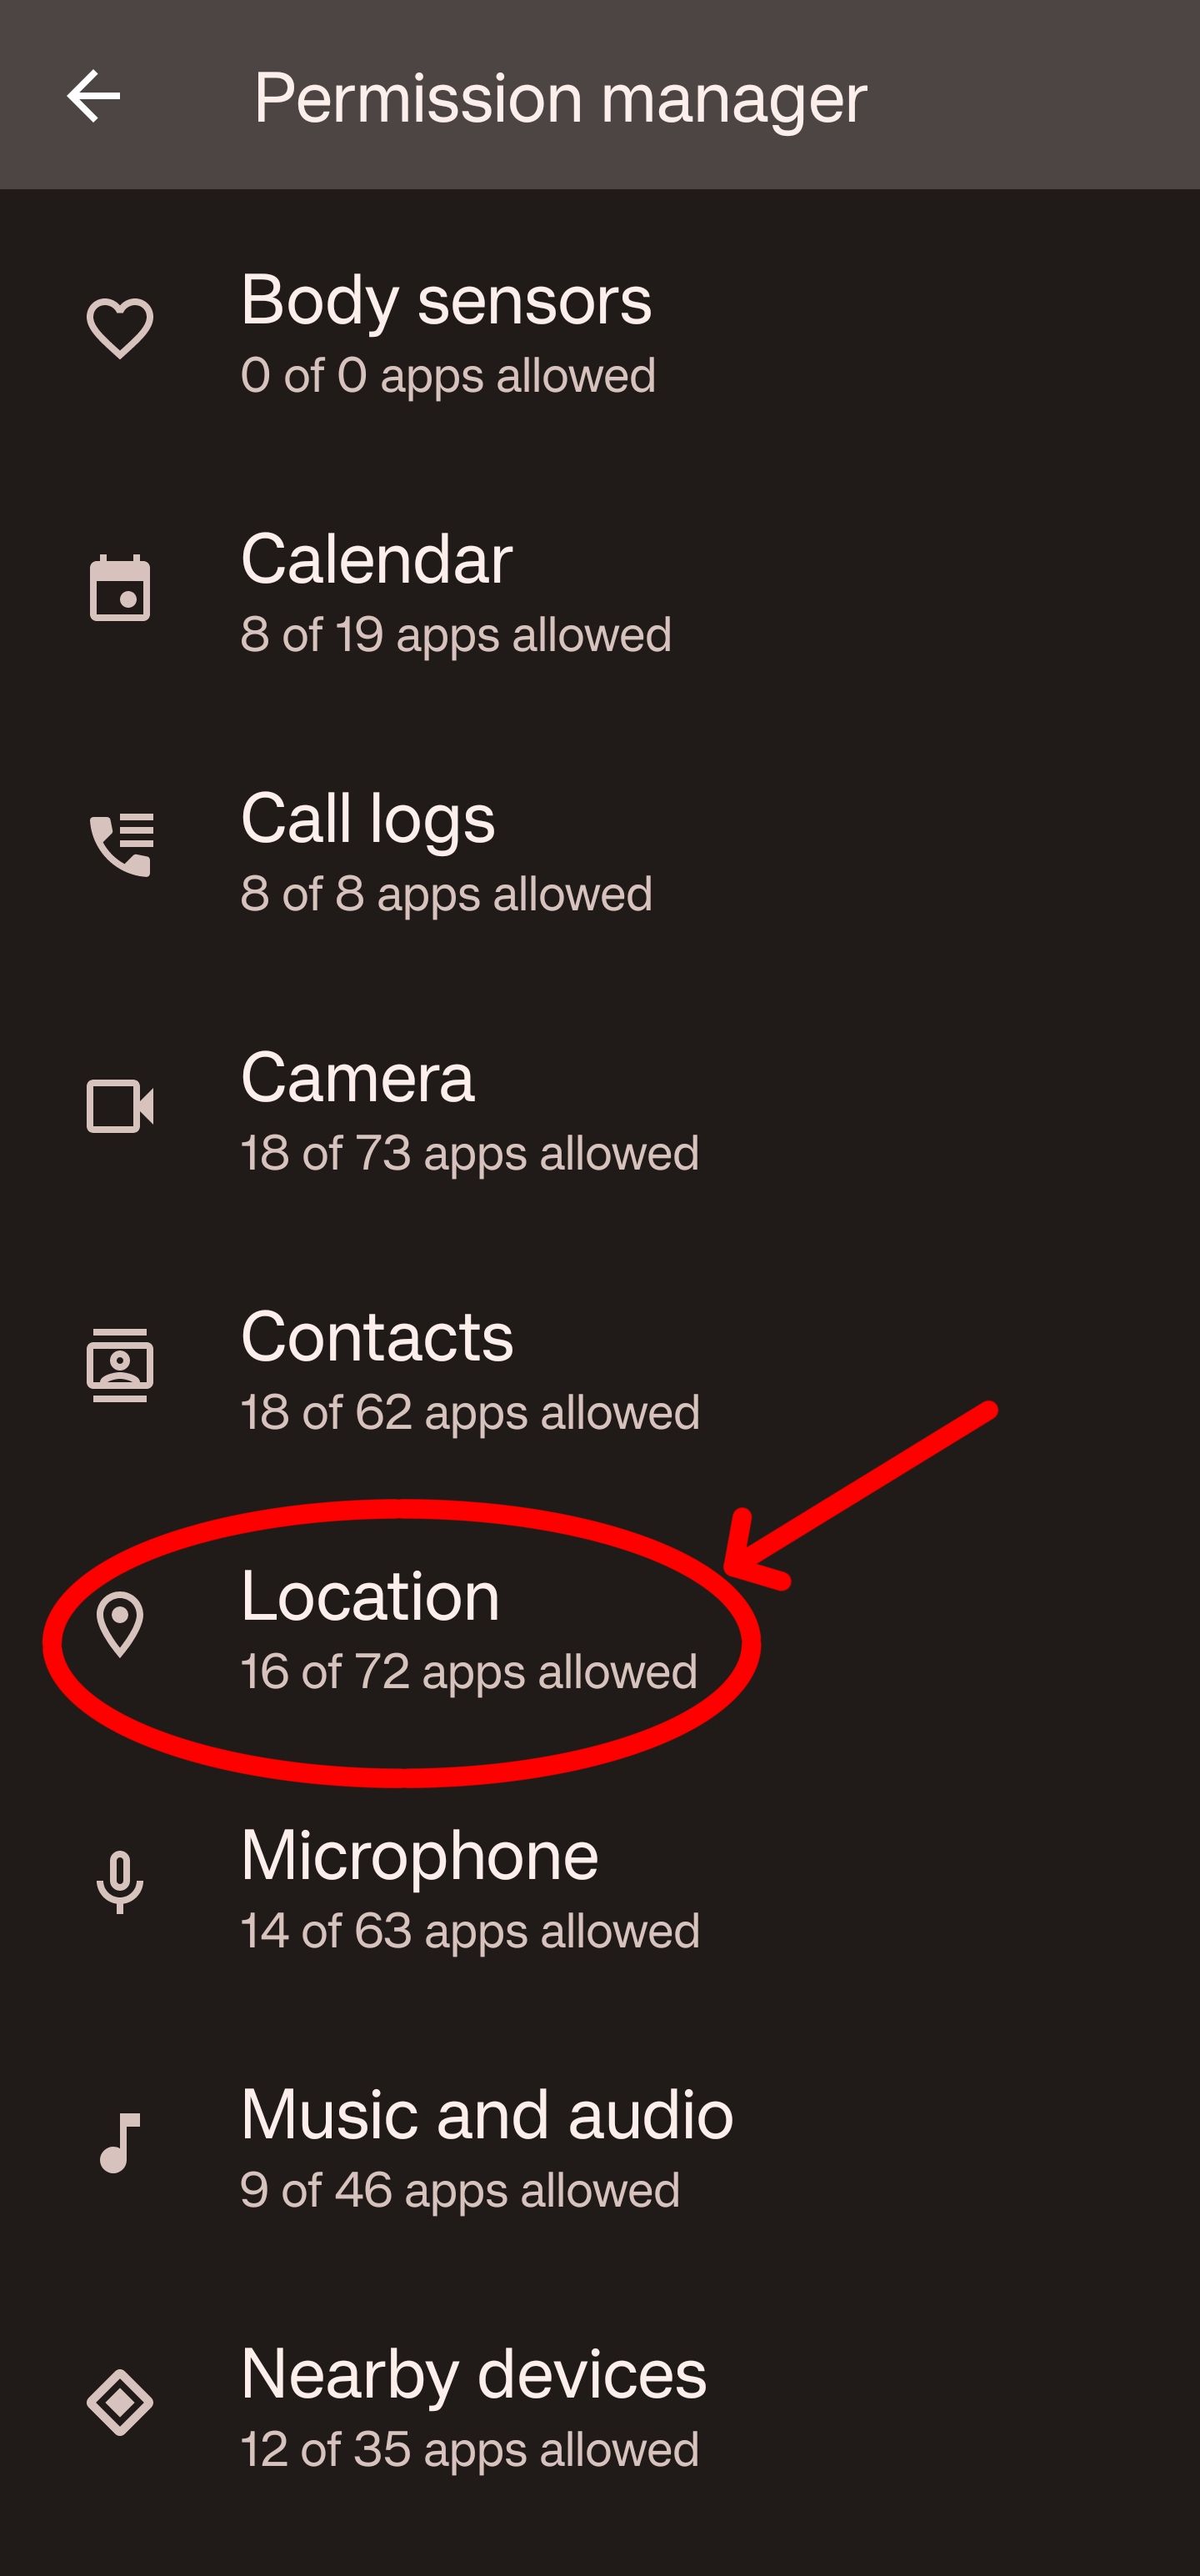 Tap location to see which apps have location permissions.